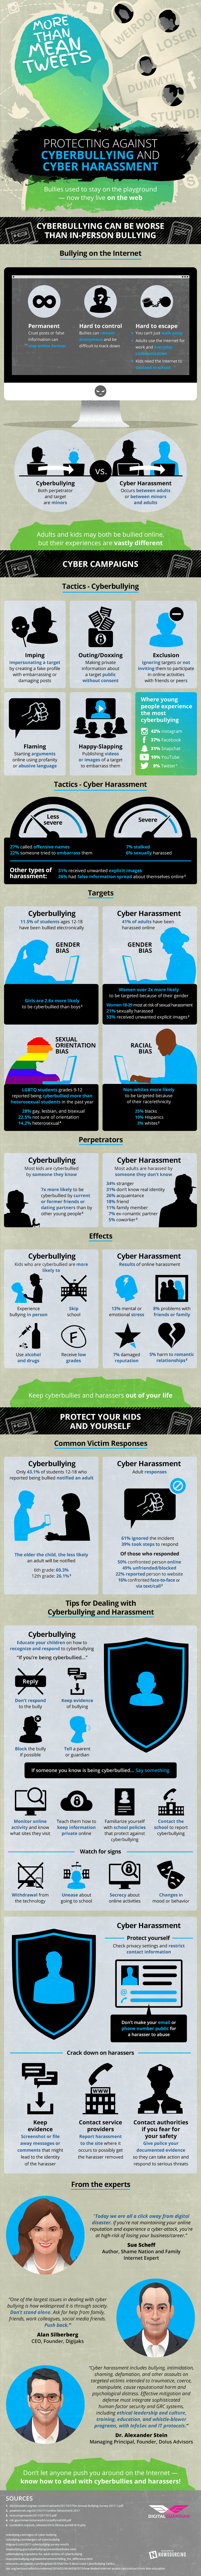 More than Mean Tweets: Protecting Against Cyberbullying and Cyber Harassment - #Infographic